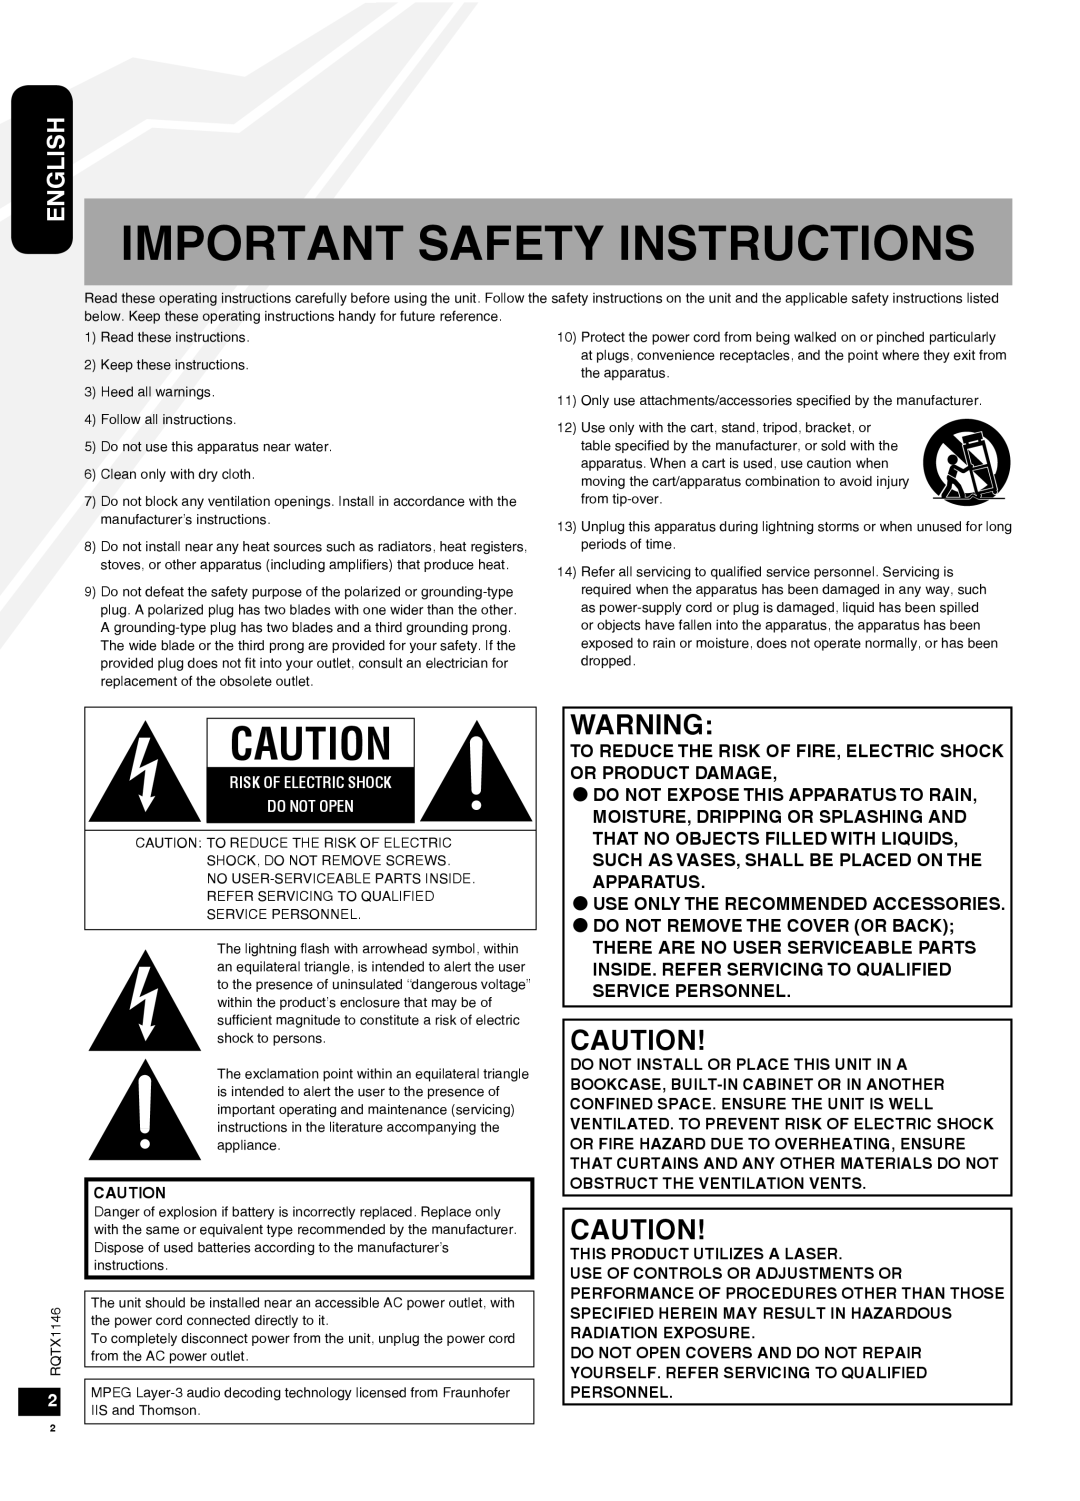 Panasonic SC-HC40 warranty Important Safety Instructions, English, Use Only The Recommended Accessories 